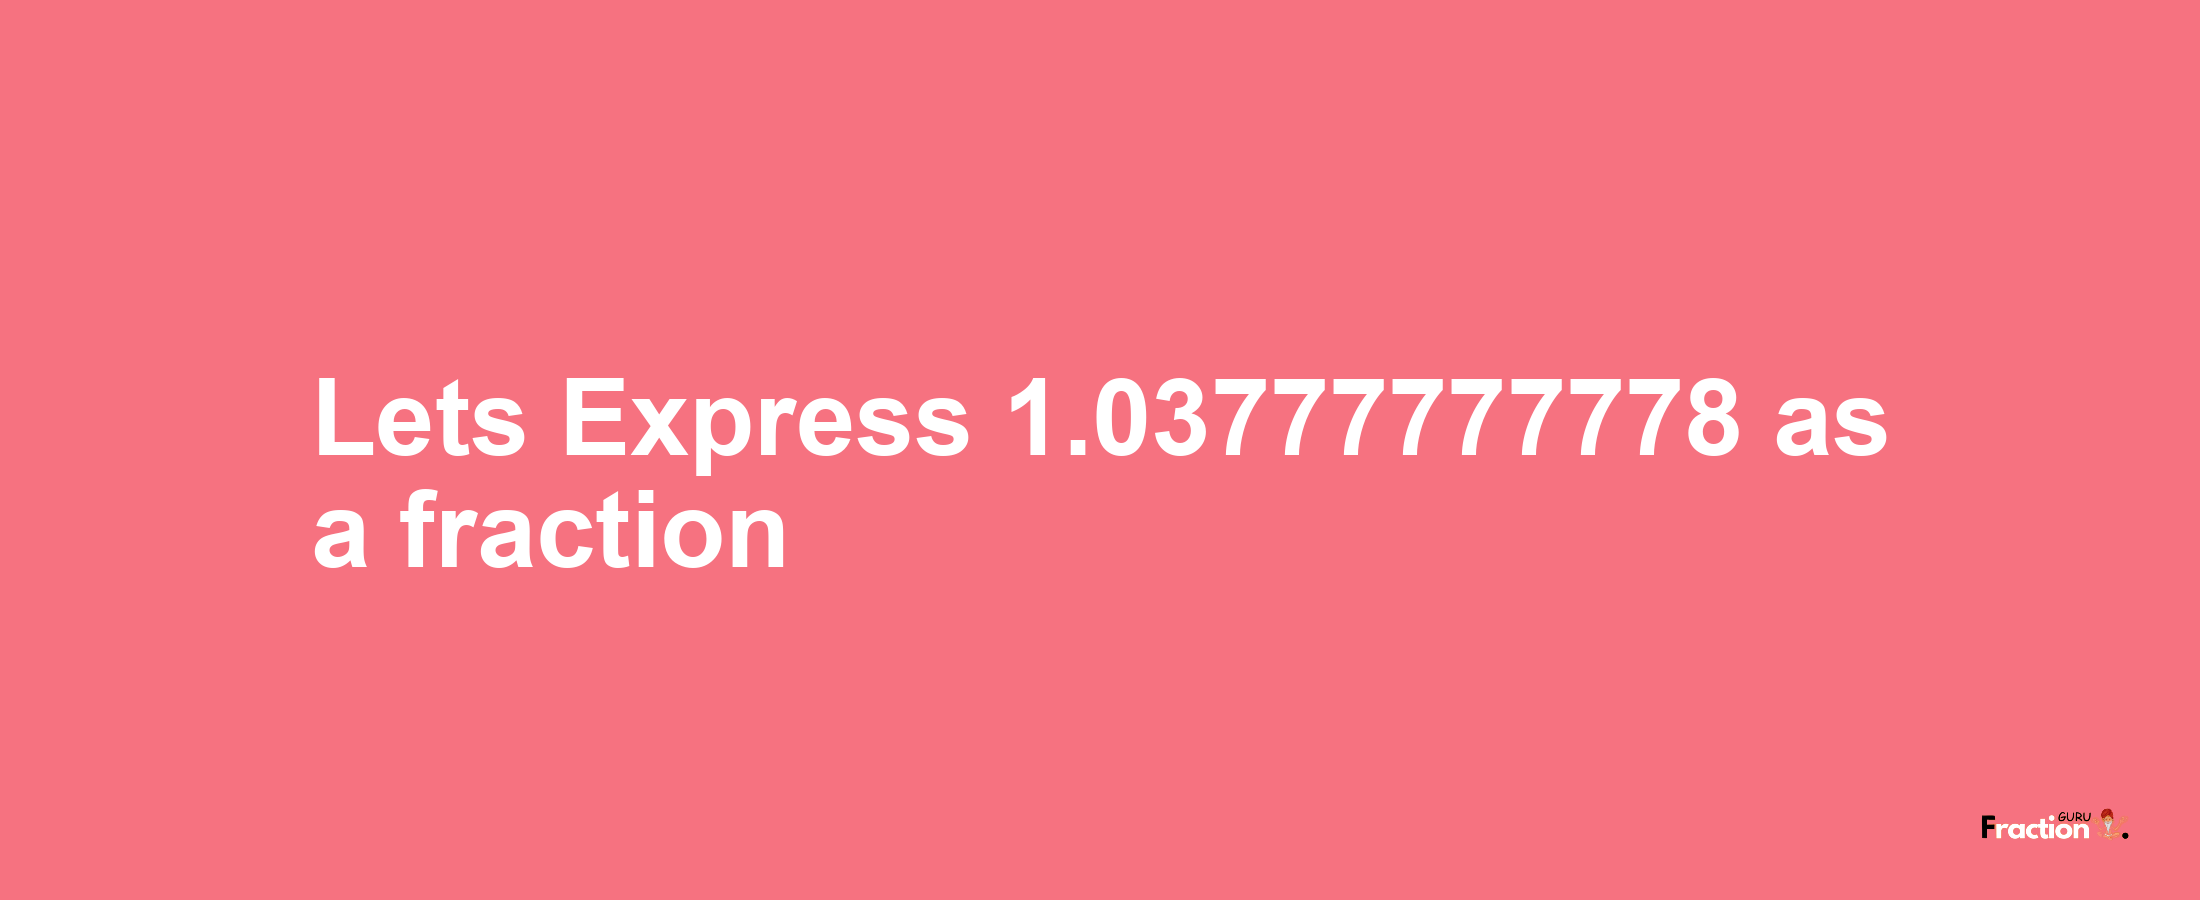 Lets Express 1.03777777778 as afraction